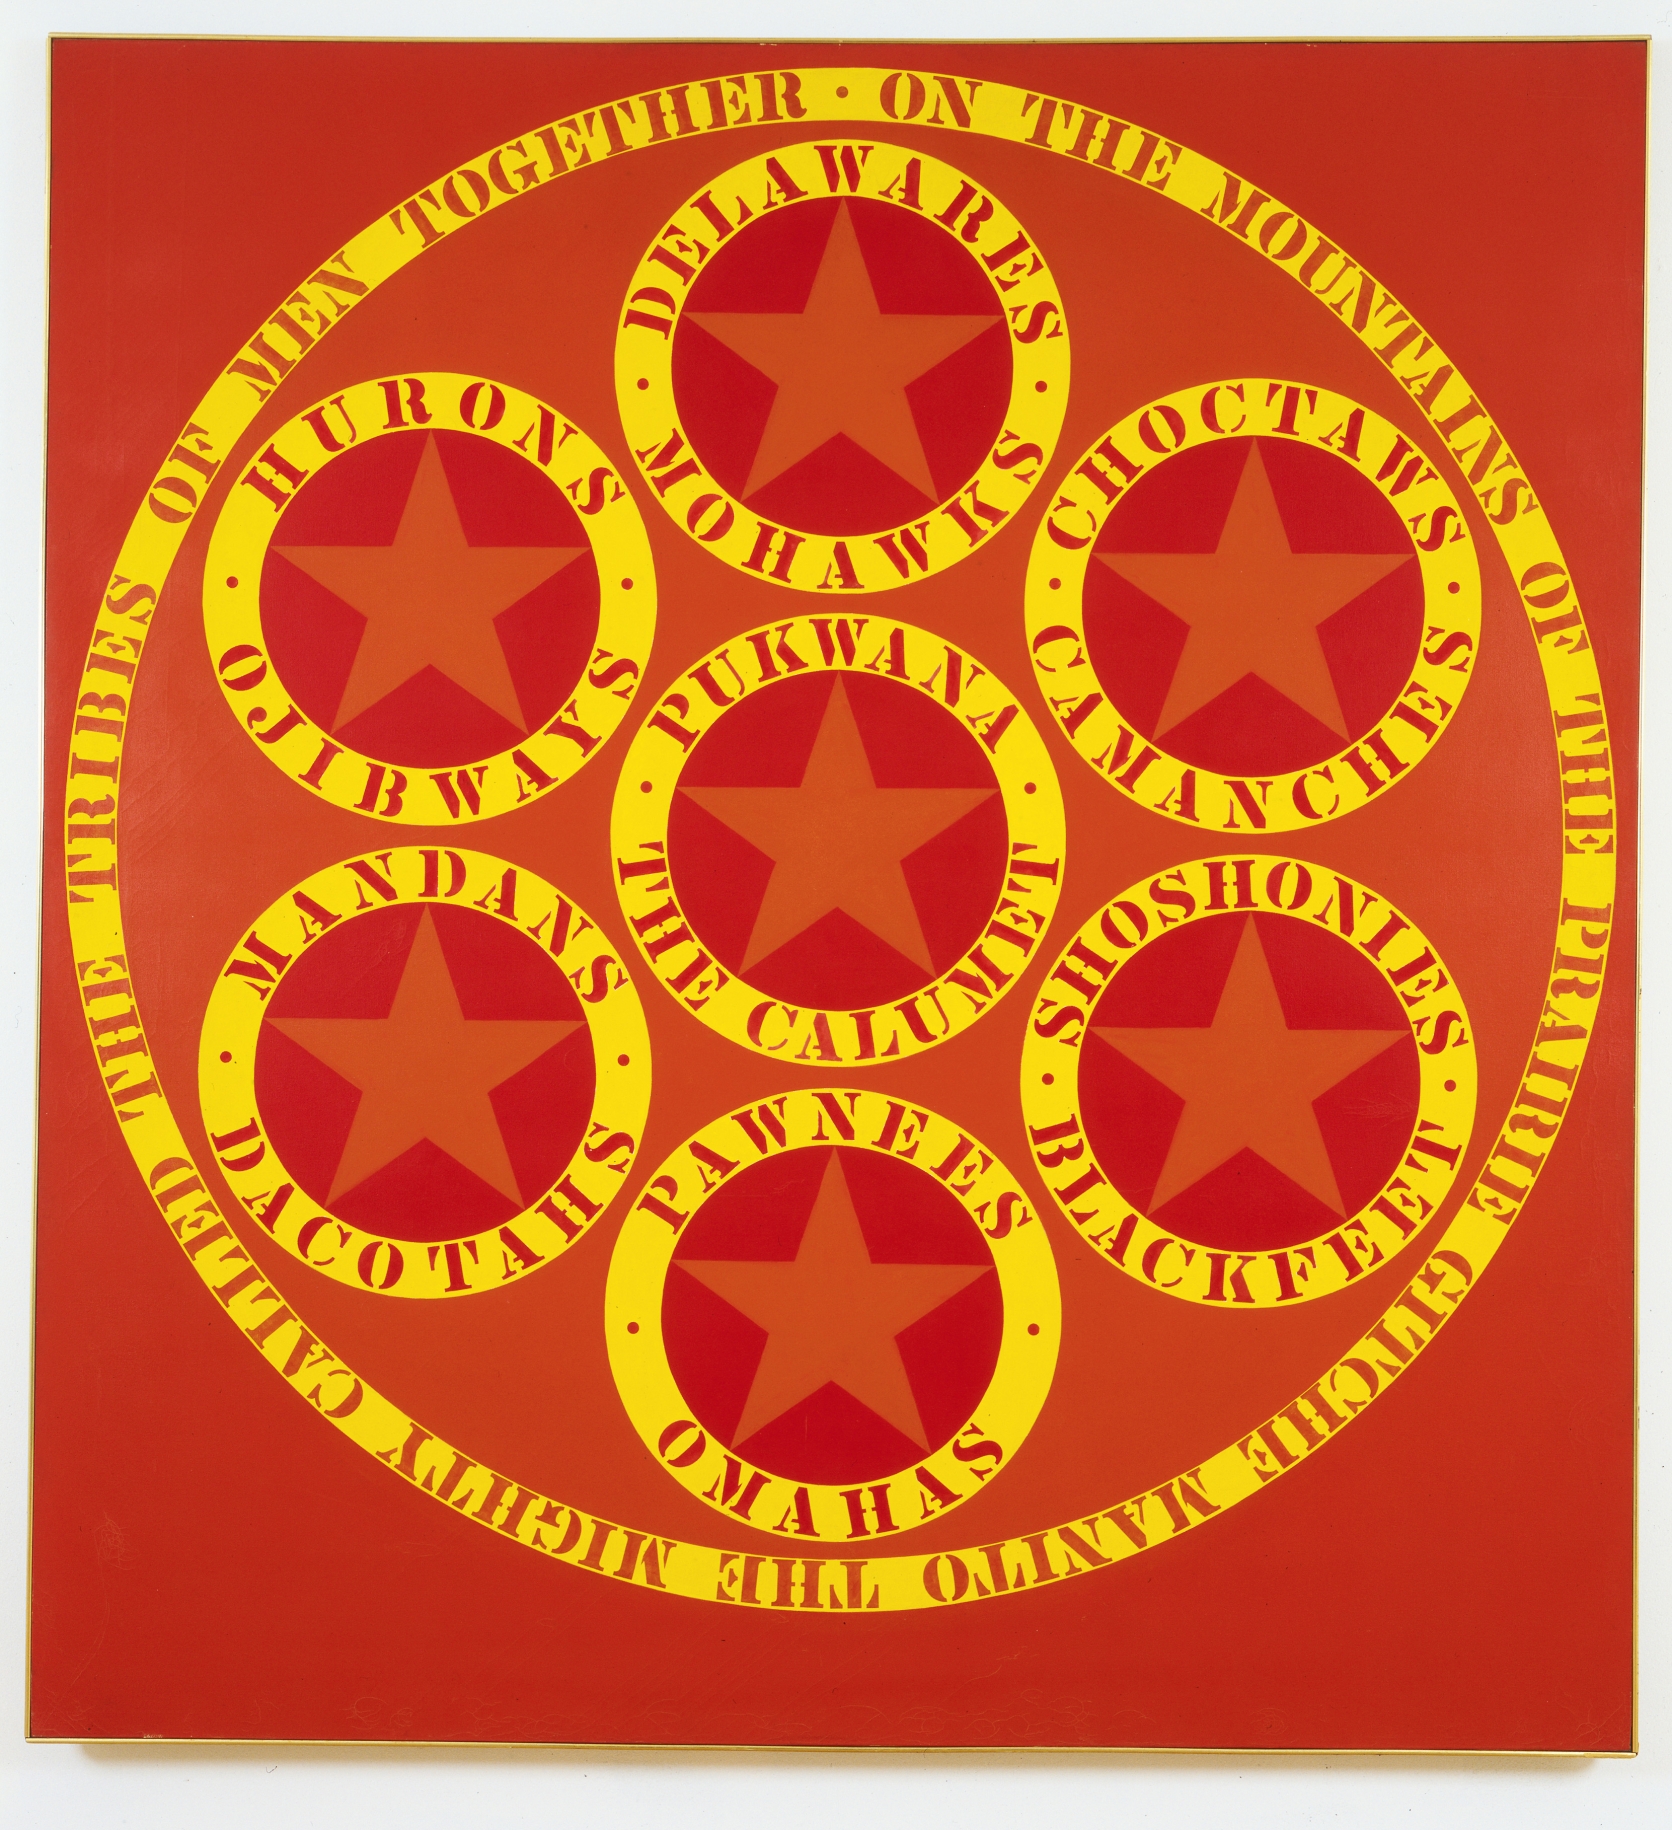 A red 90 by 84 inch canvas titled "The Calumet." A large circle containing seven smaller circles dominates the canvas. The seven smaller circles each hold an orange star, and are surrounded by the names of different Native American tribes painted in red stenciled letters in an outer yellow ring.  A yellow ring encloses the large circle, and contains the red stenciled text "On the mountains of the prairie Gitche Manito the mighty called the tribes of men together."